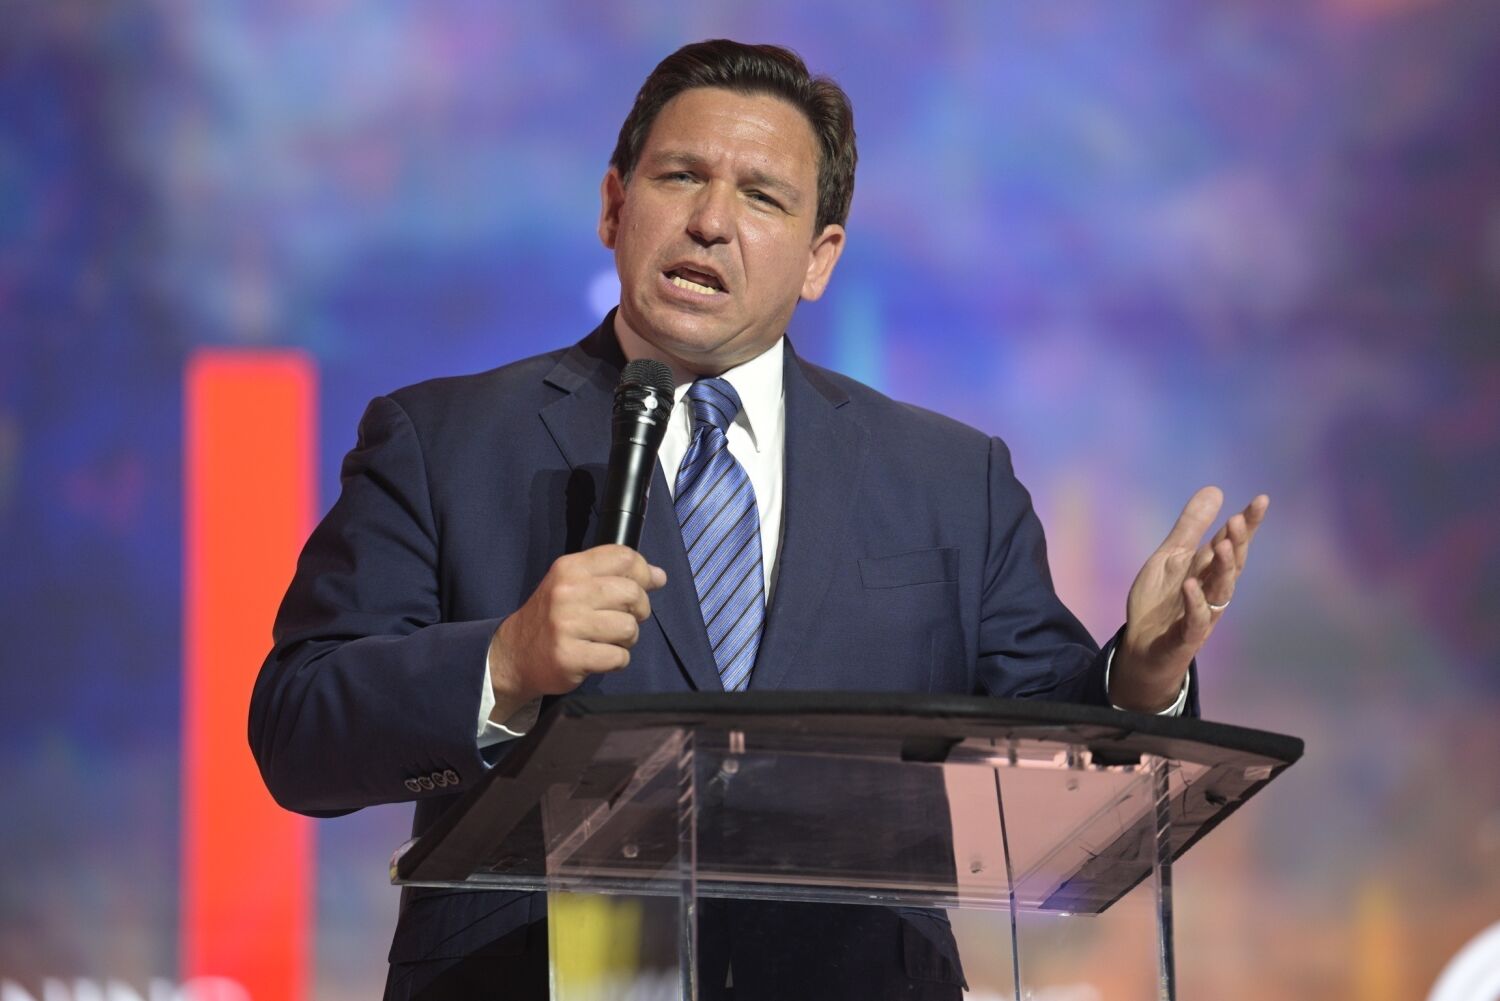 A prison at Disney World? DeSantis says he'll reassert control over special Florida district